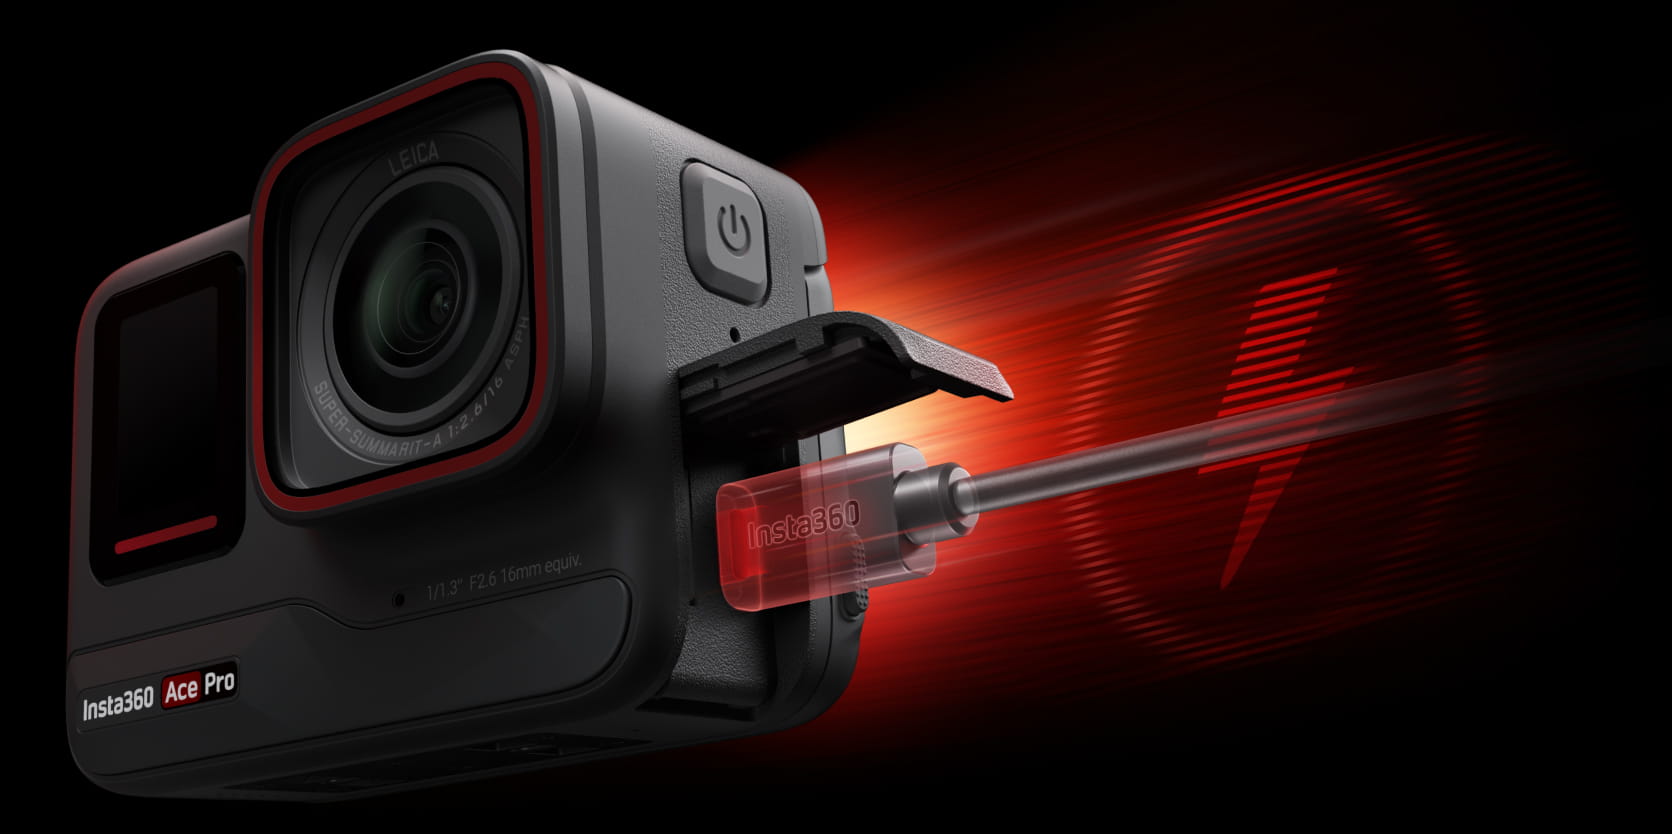 The Insta360 Ace Pro & Ace action cameras are powered by AI